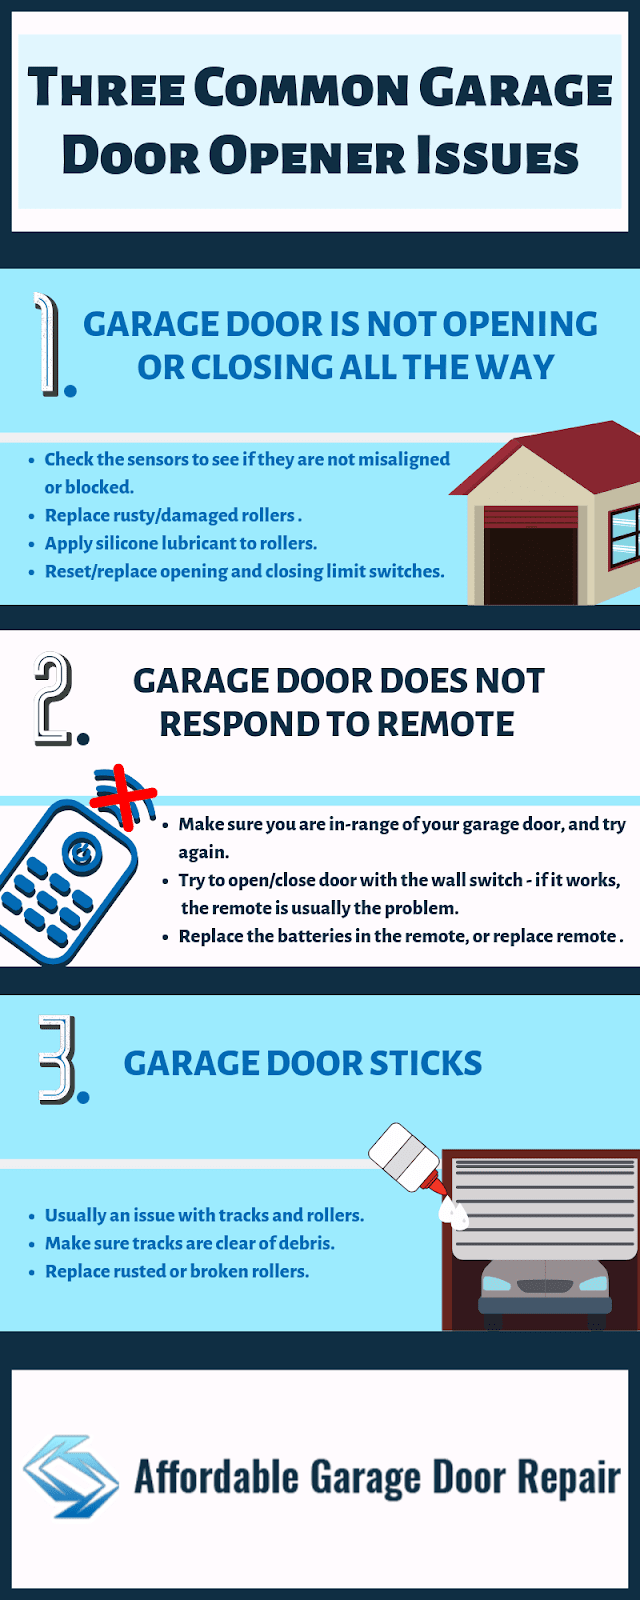 Having a garage opener issue? Learn how you can quickly solve common issues and keep your doors safe & secure!